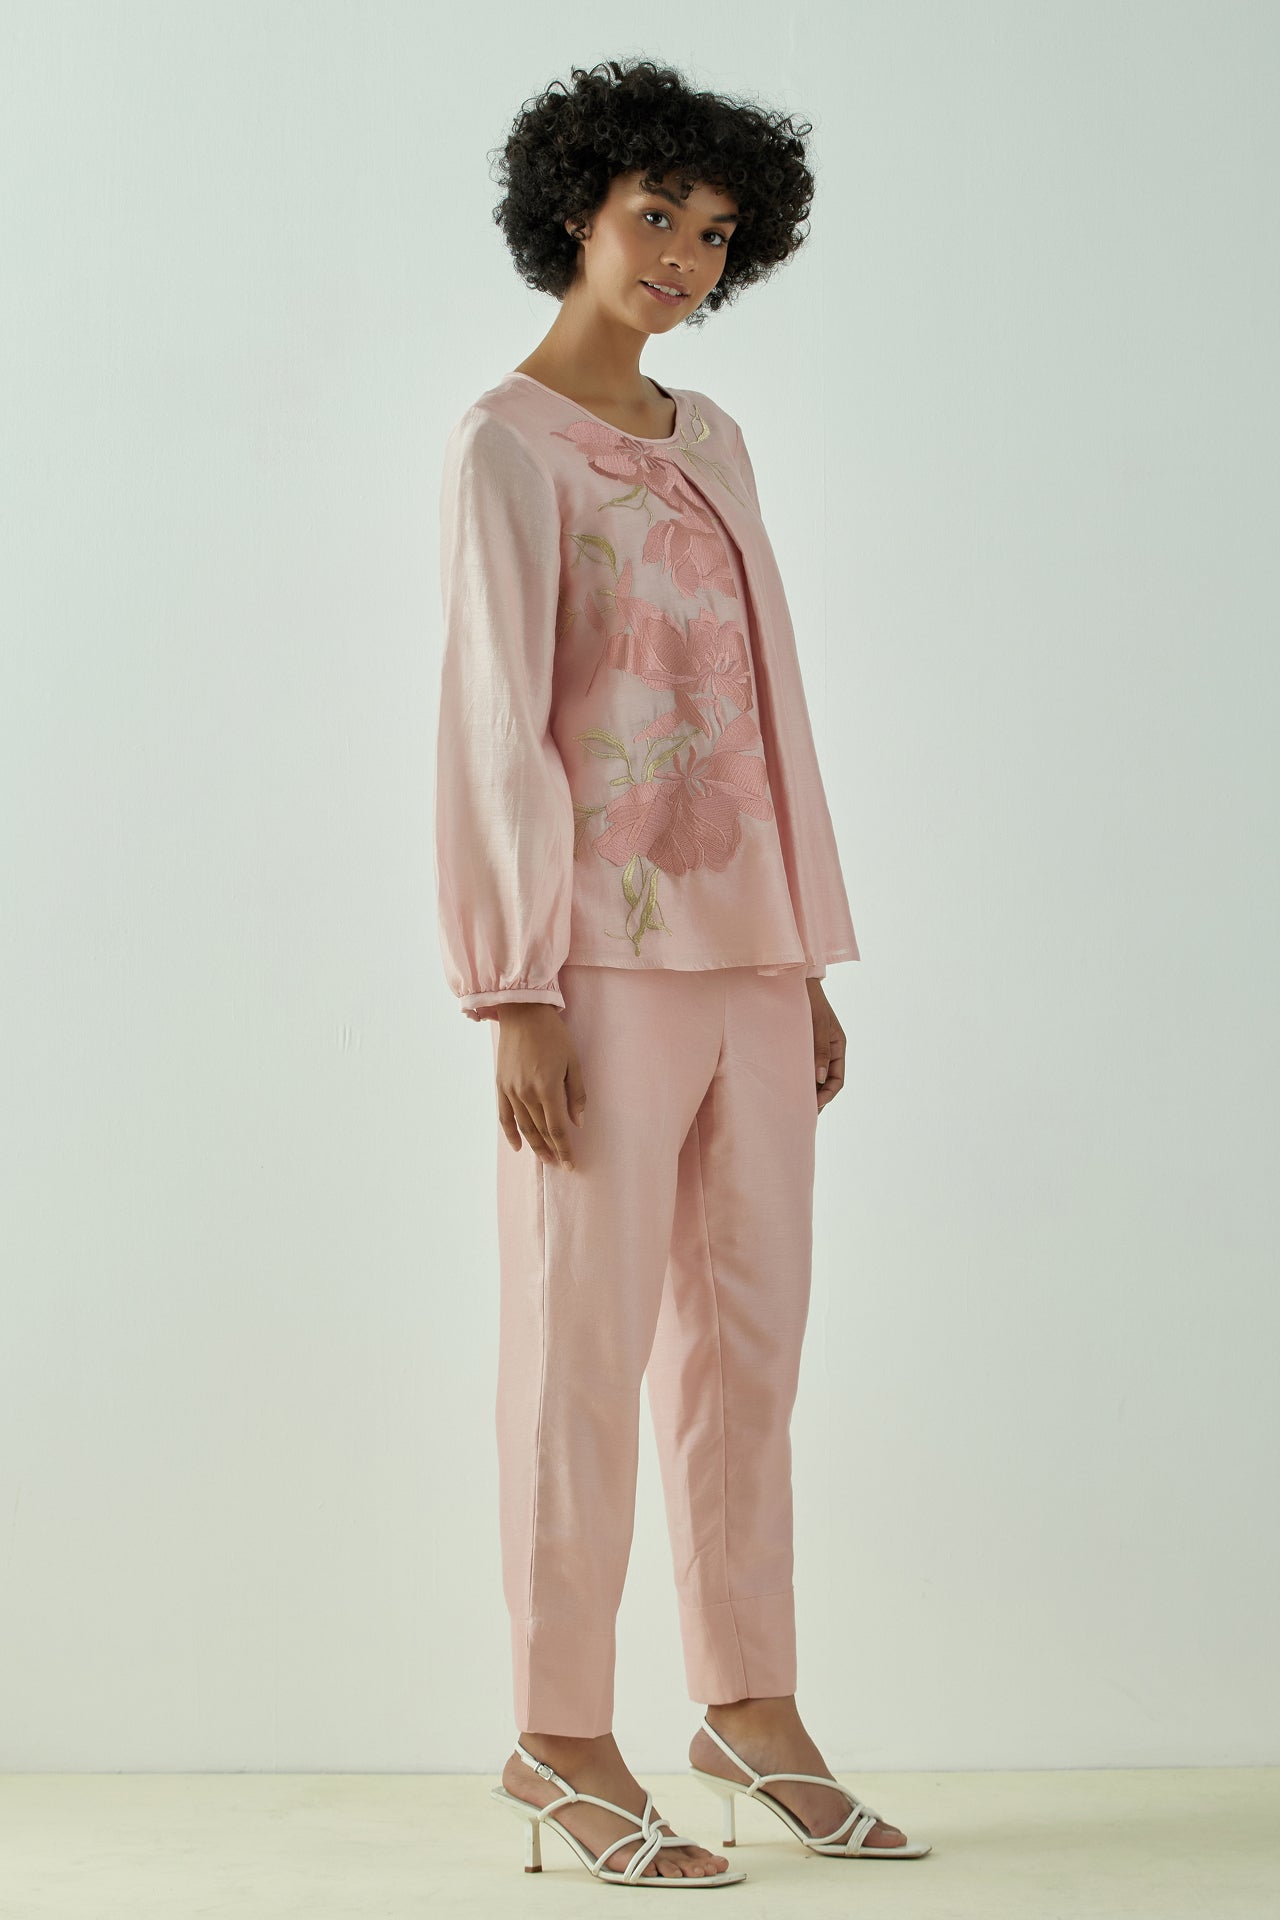 Miriam - Old Rose Demure Top with Ankle Pants